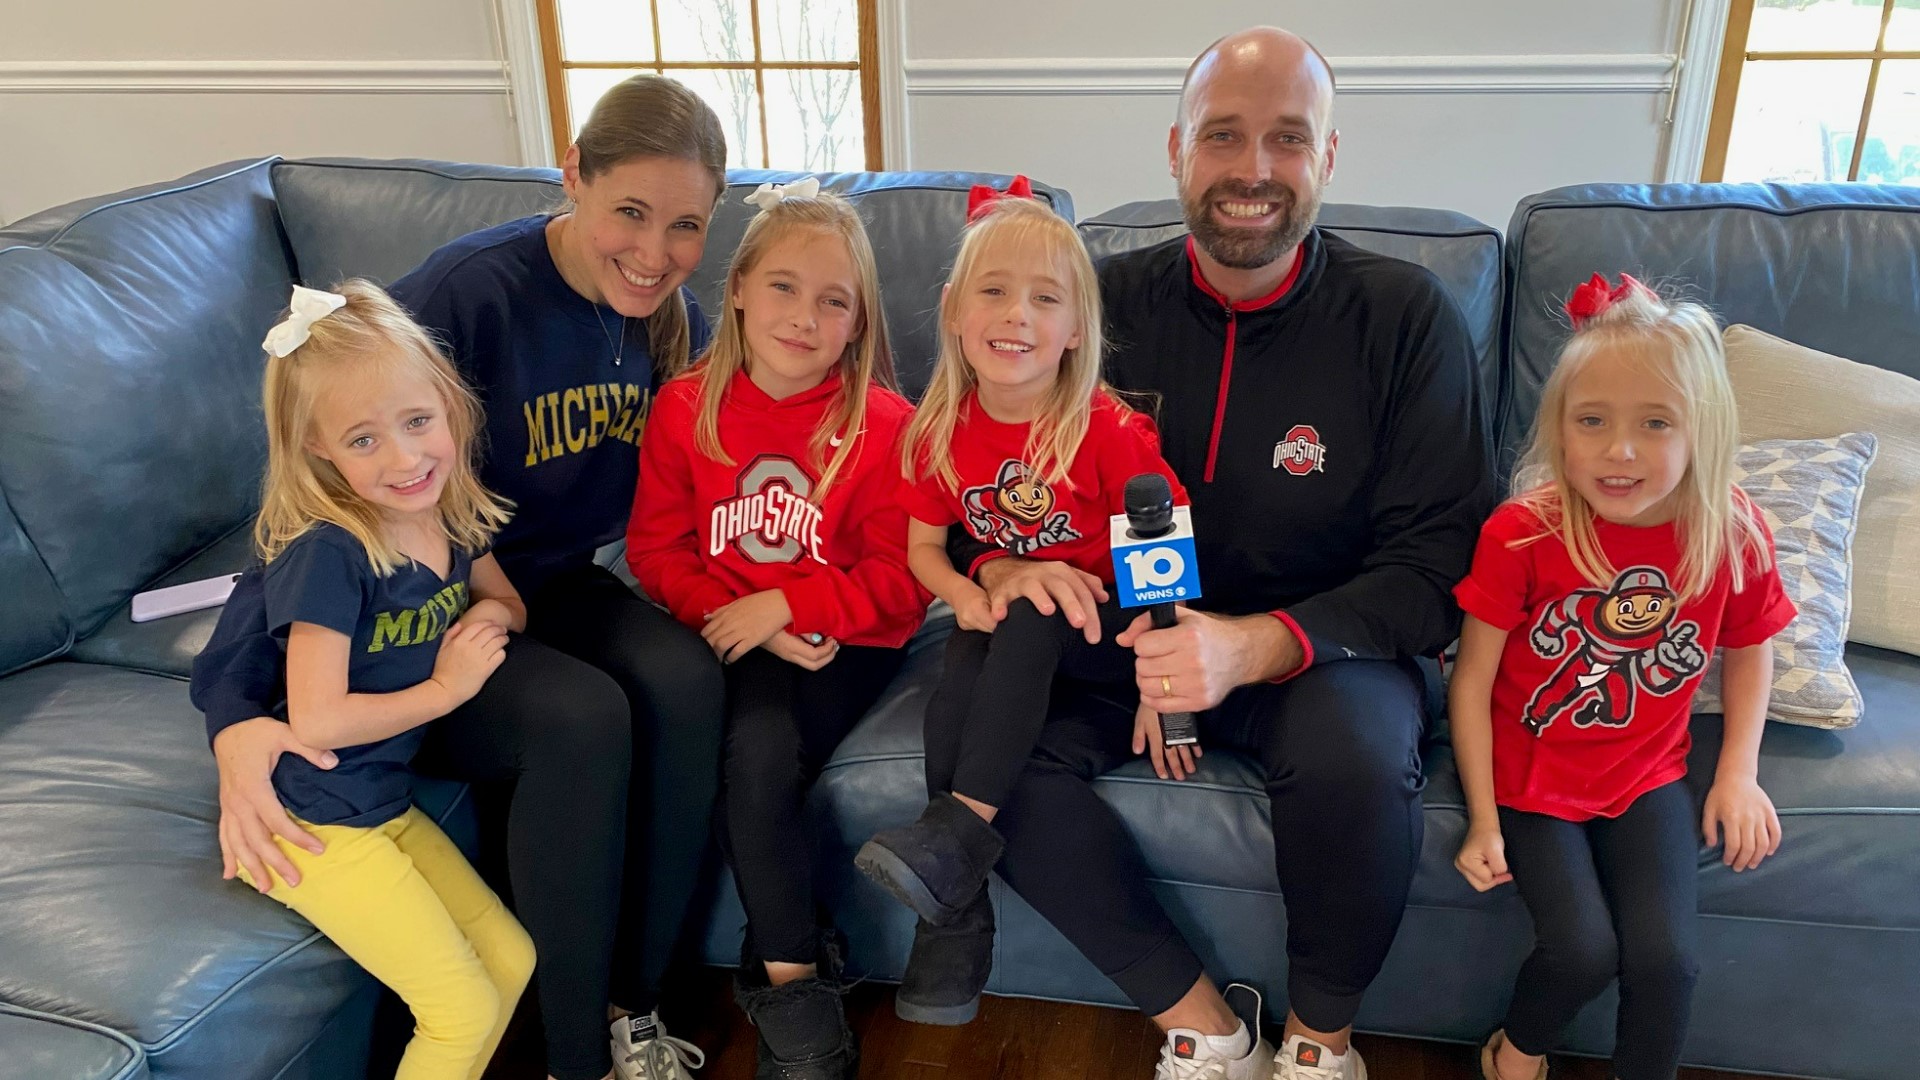 When mom roots for Michigan and dad is a Buckeye, what’s a set of triplets and their big sister to do?